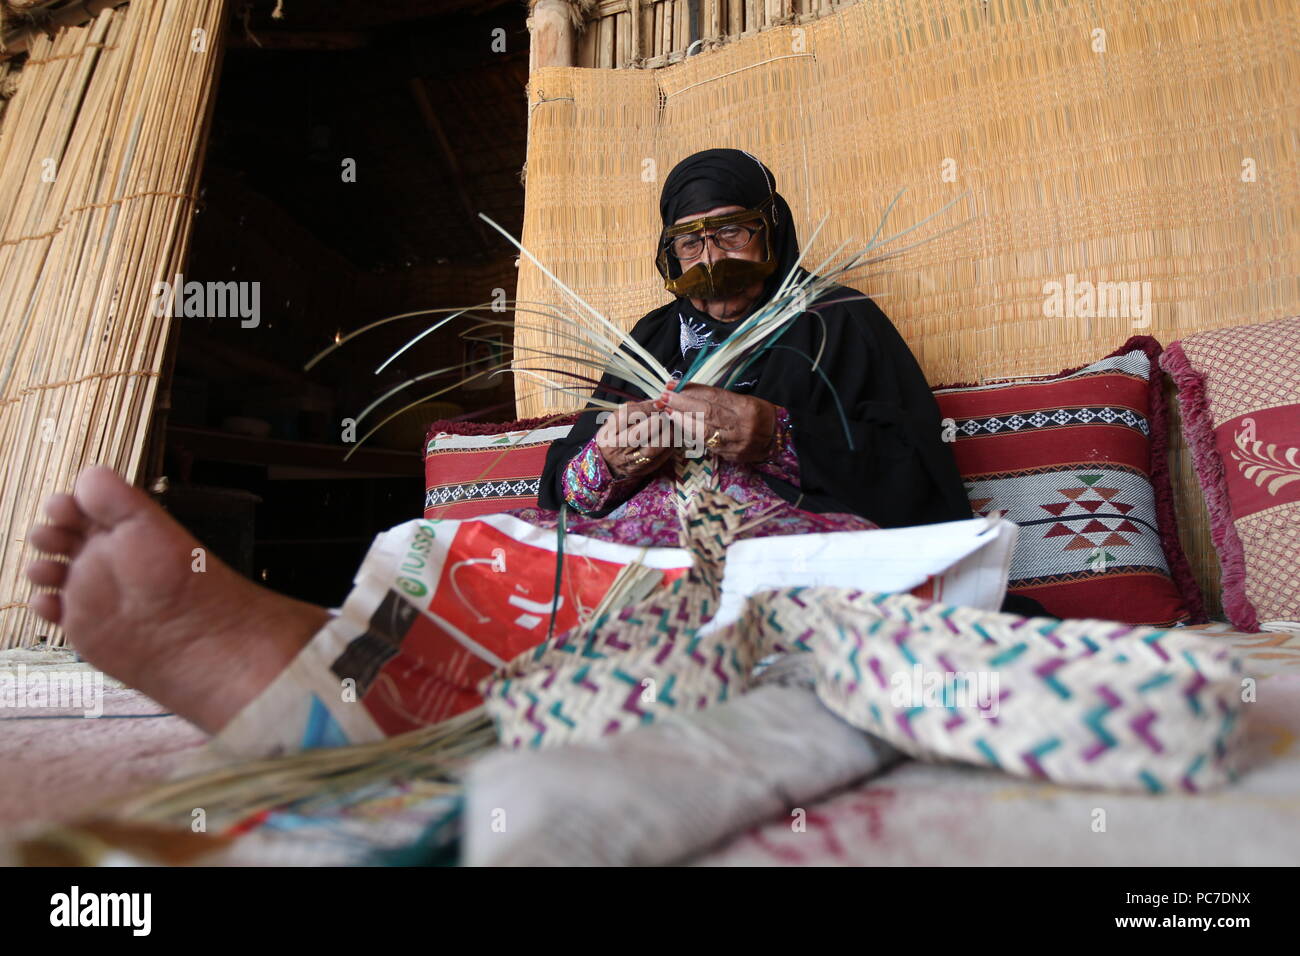 A UAE woman, sporting a metallic burqa with henna died fingers, weaves straw baskets and mats out of palm leaves at the heritage village in Fujairah. Stock Photo